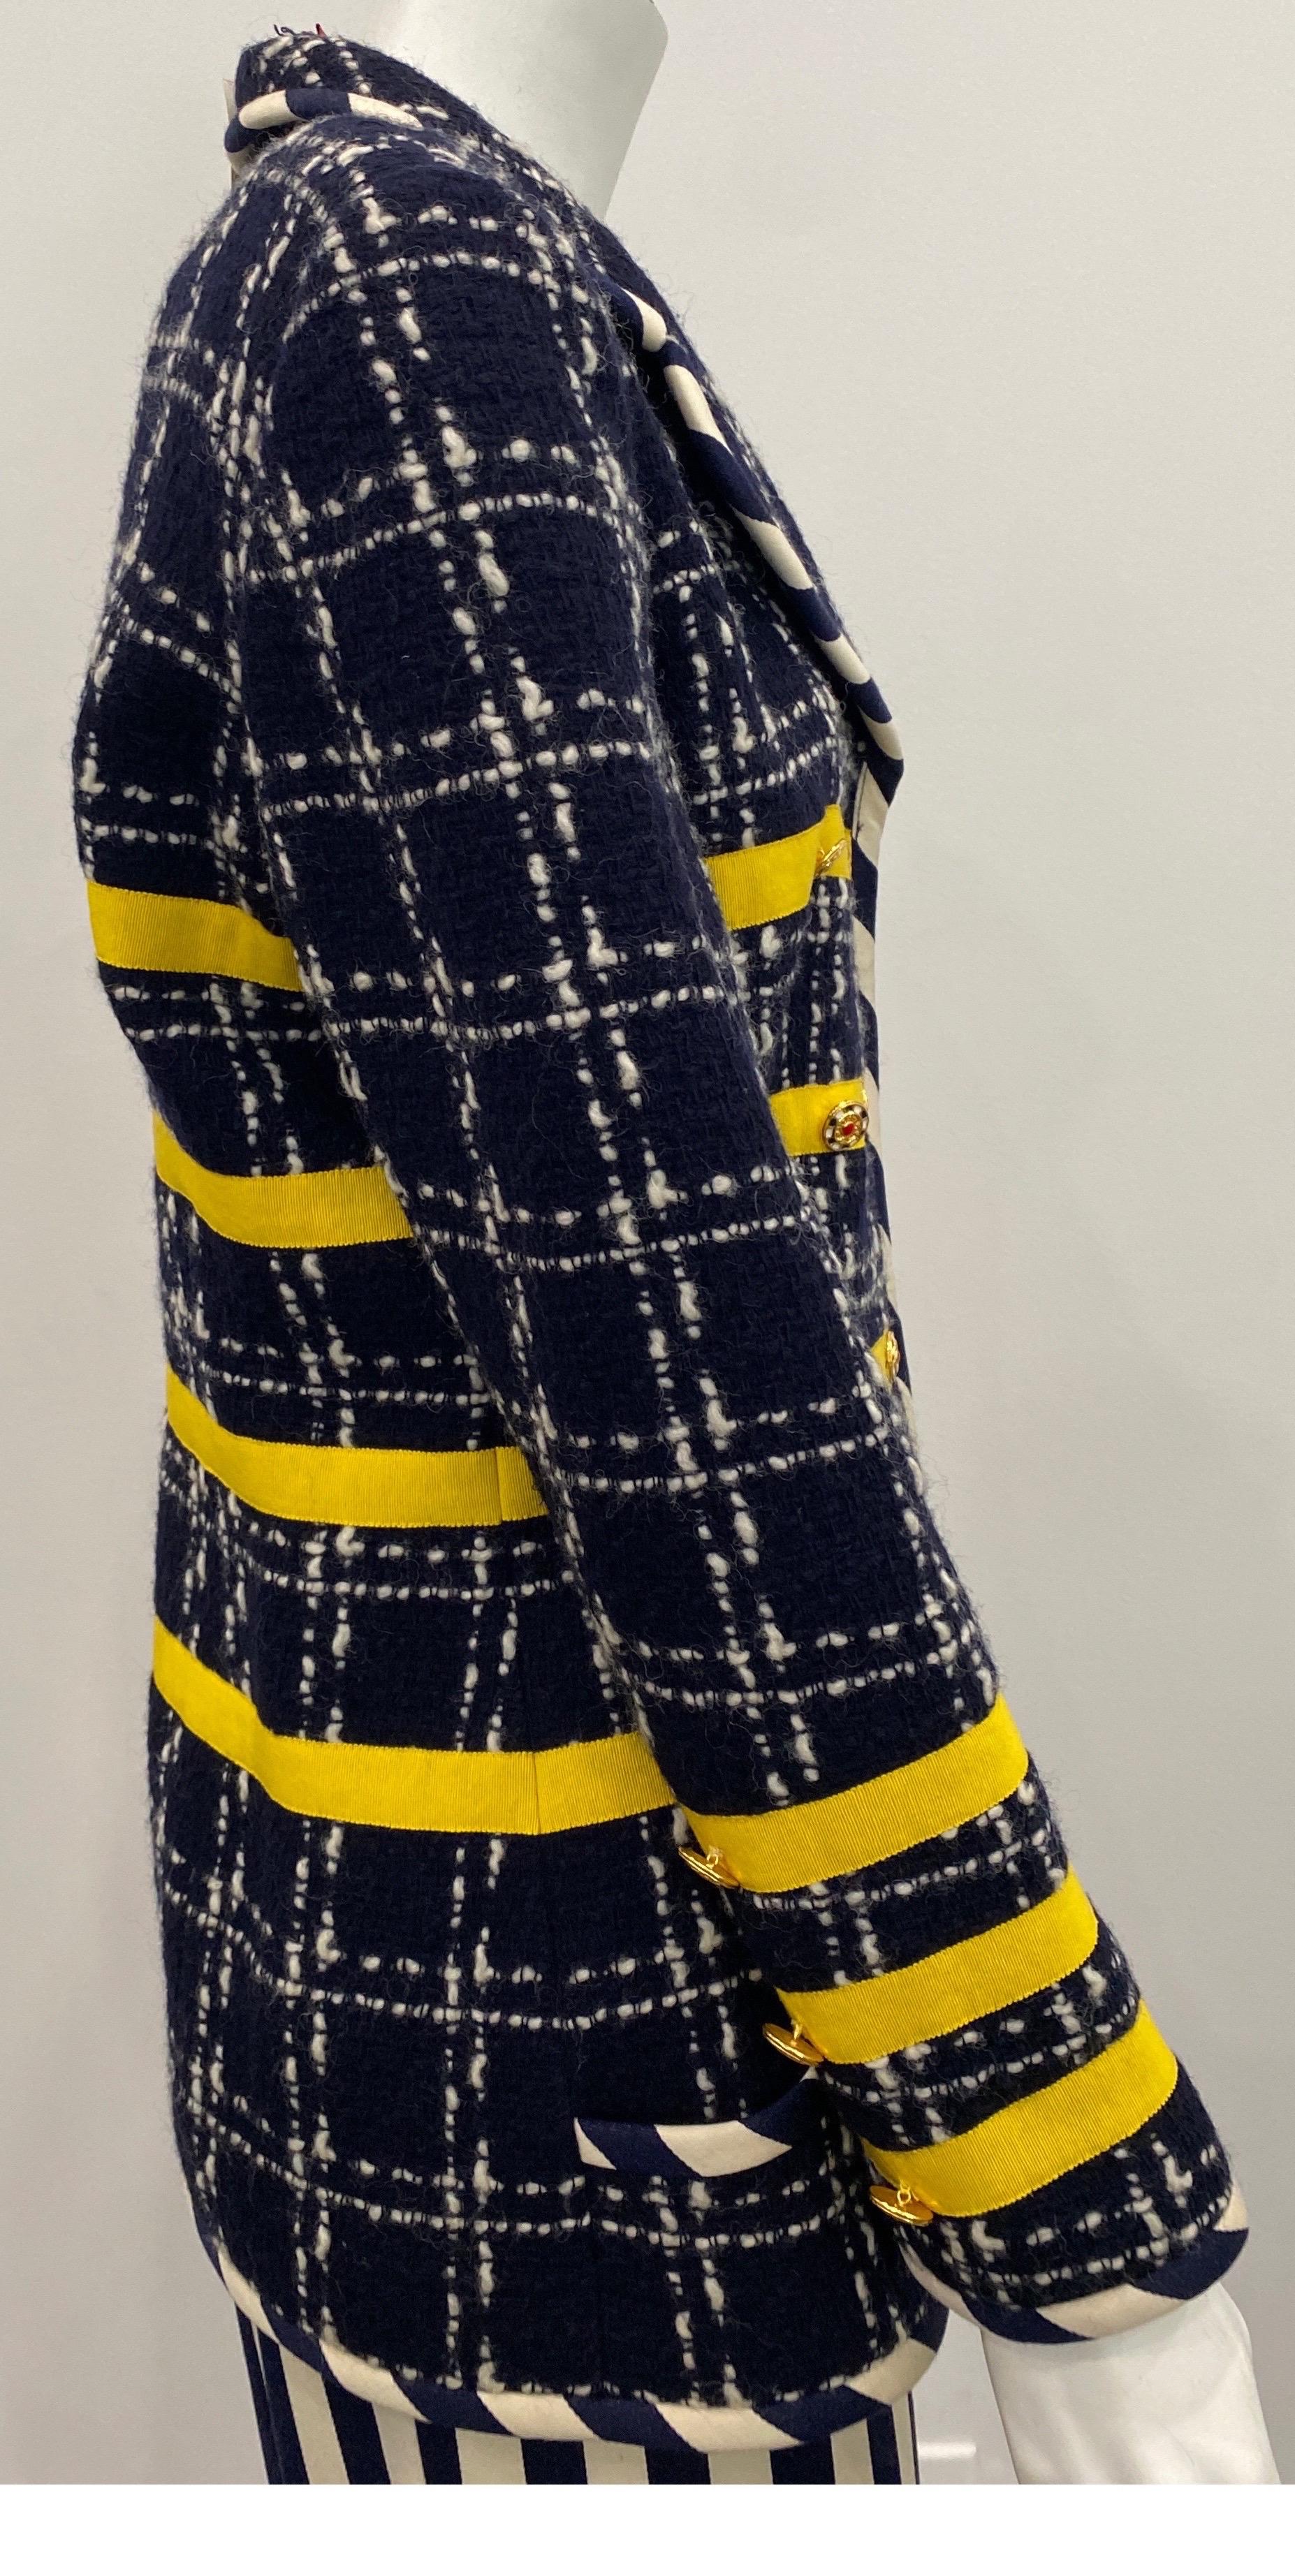 Emanuel Ungaro Parallele 1990’s Navy Boucle Jacket with skirt - Size 12 For Sale 4